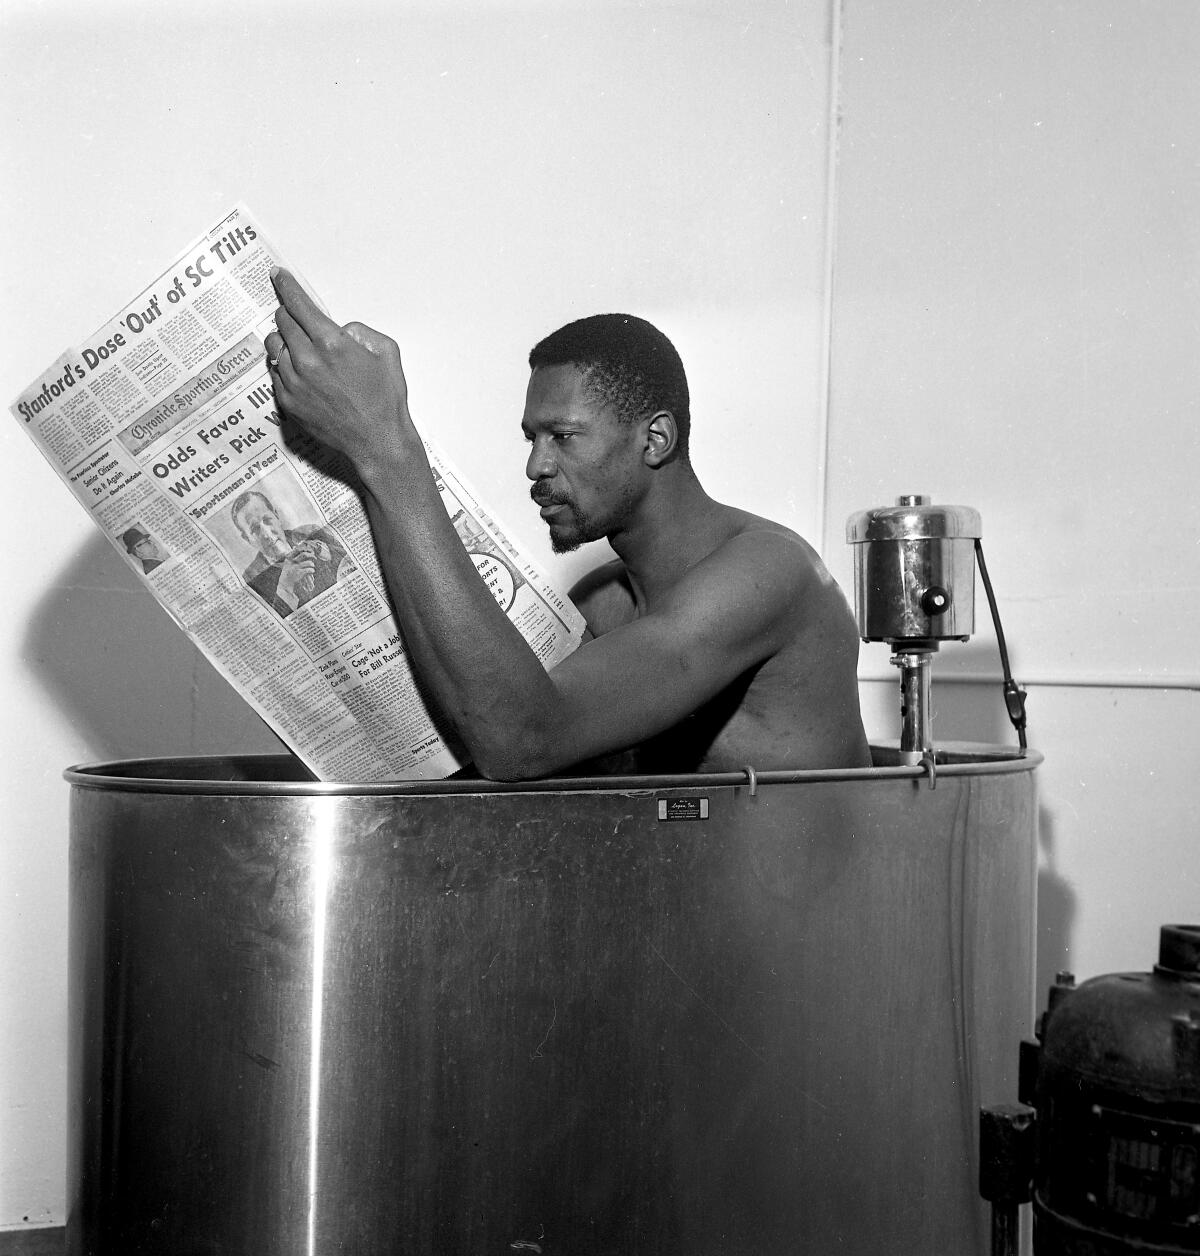 Boston Celtics star Bill Russell relaxes in a whirlpool bath following a practice in San Francisco on Dec. 31, 1963.